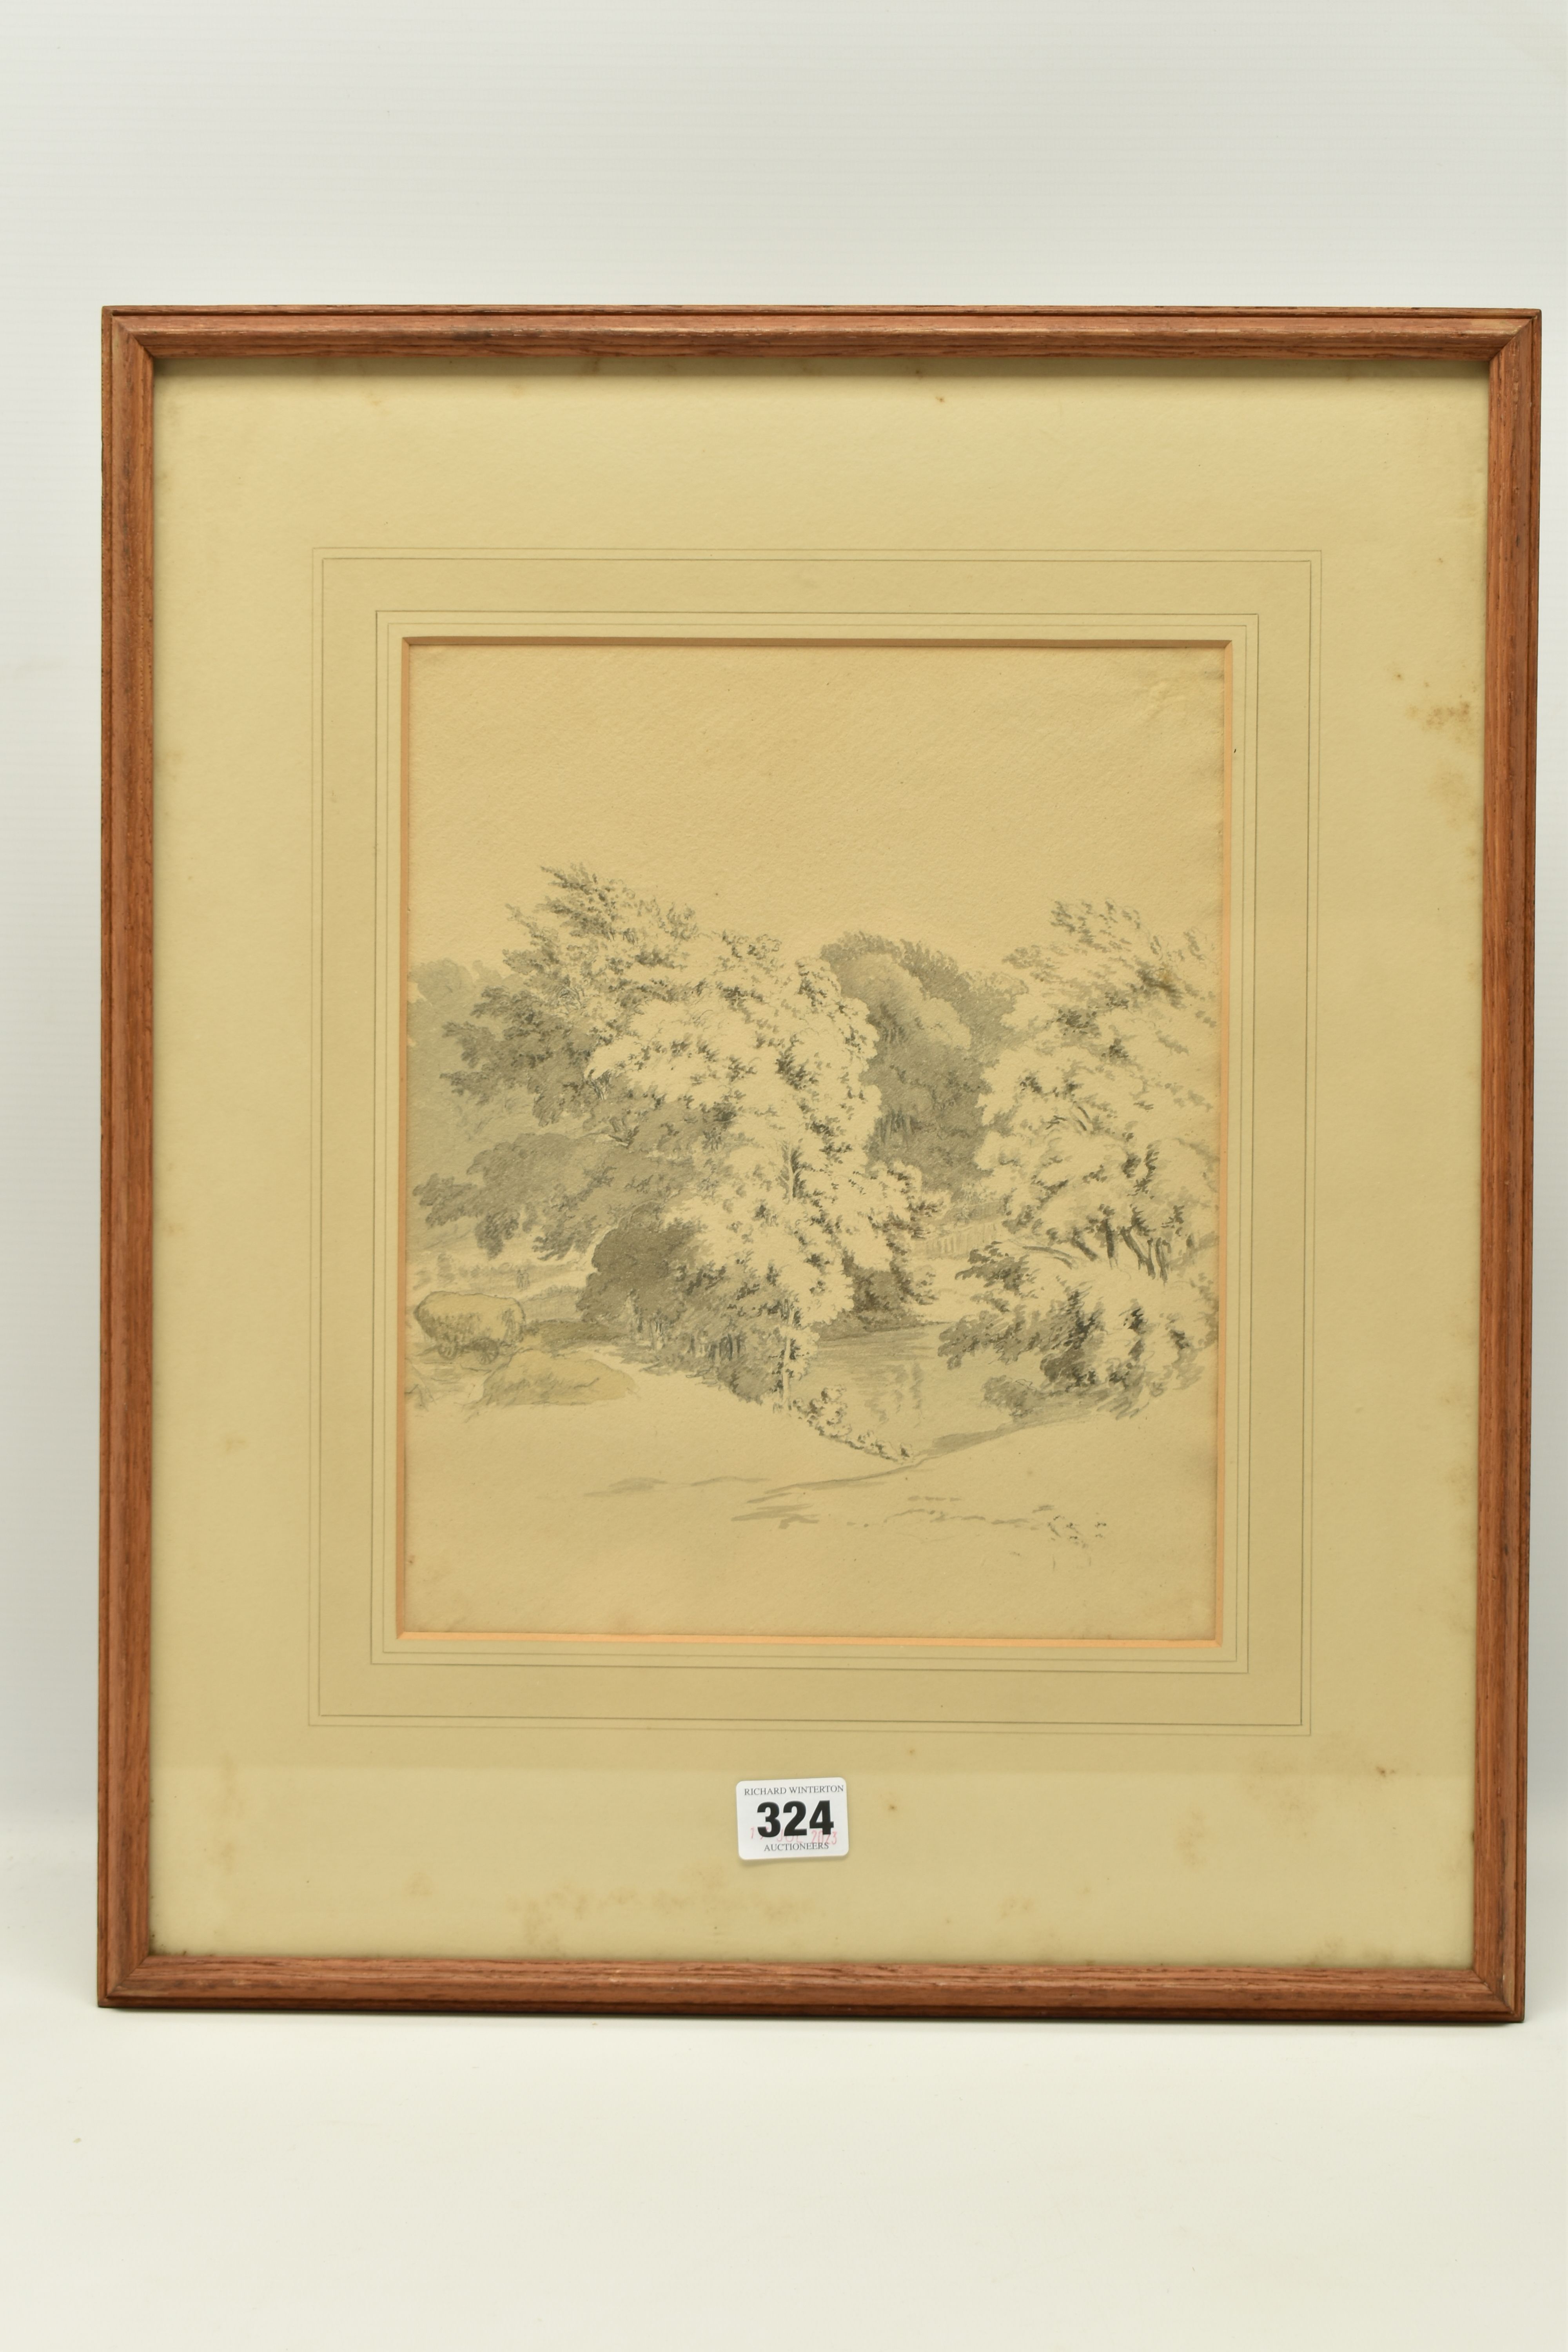 CIRCLE OF ROBERT HILLS (1769-1844) 'TREES IN KNOLE PARK', a sketch of a landscape with pool of